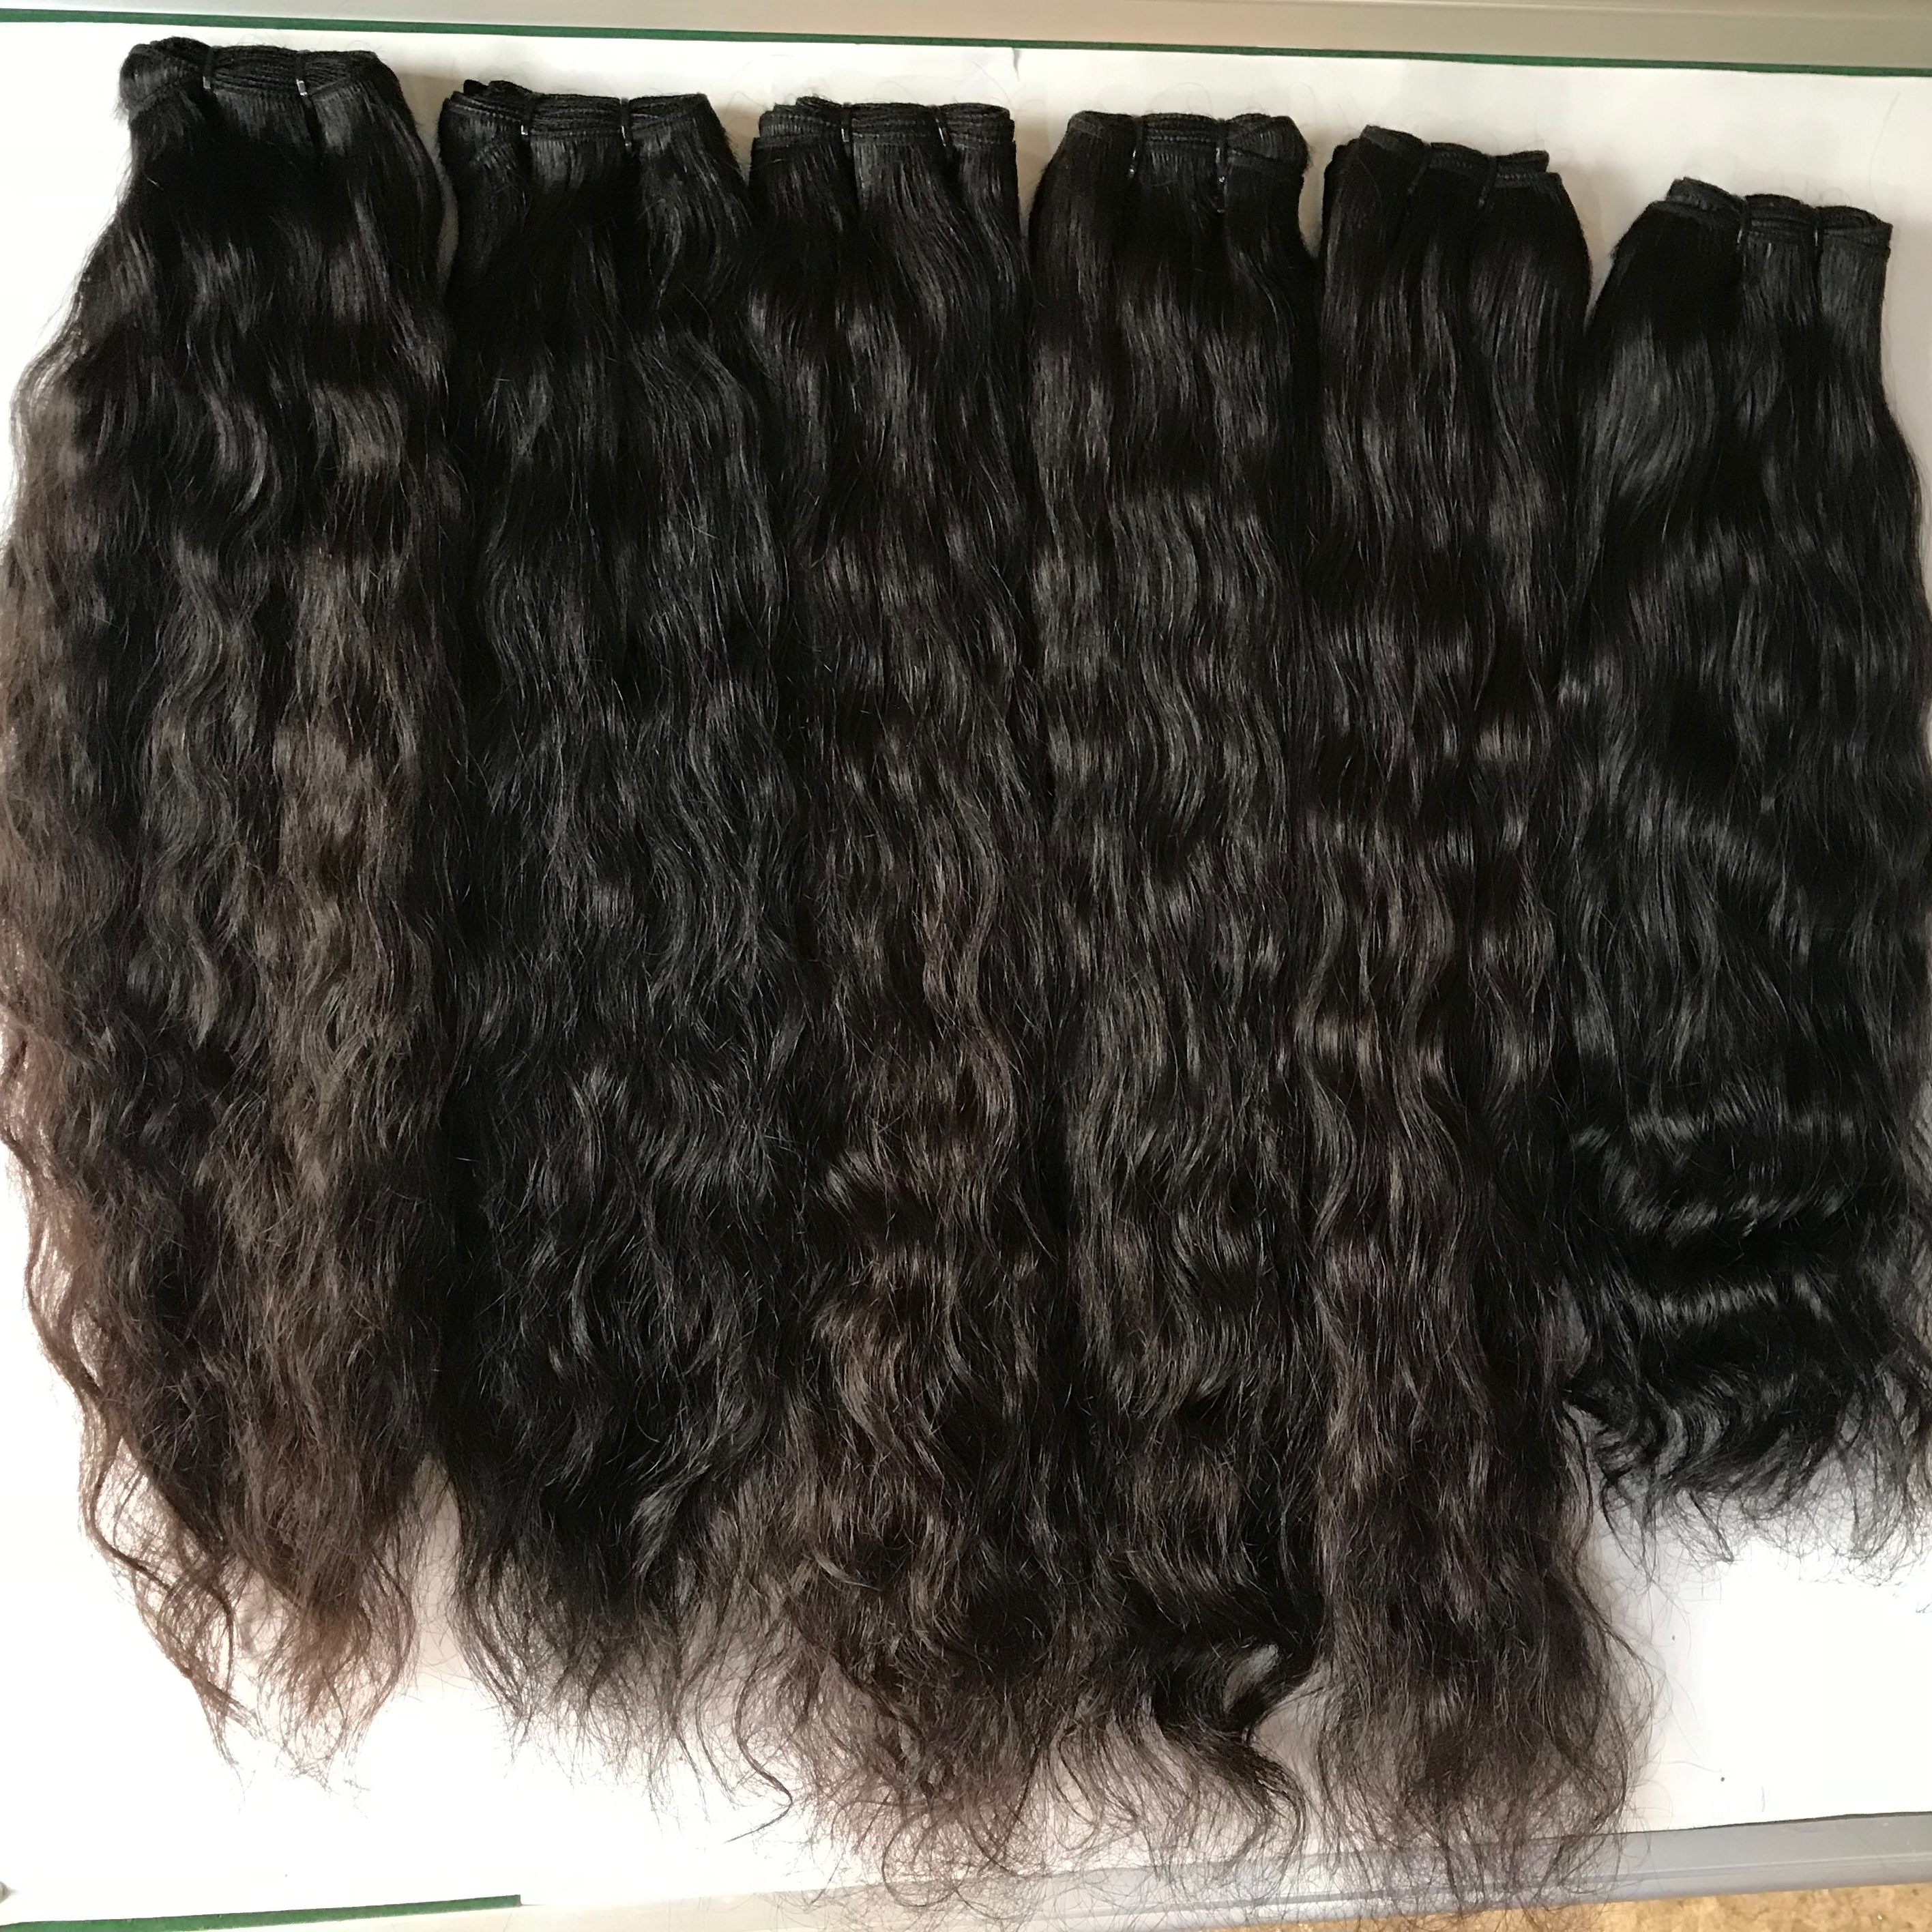 Long Wavy Indian Human Hair Extensions With Temple Human Hair  Manufacturer,Exporter,Supplier